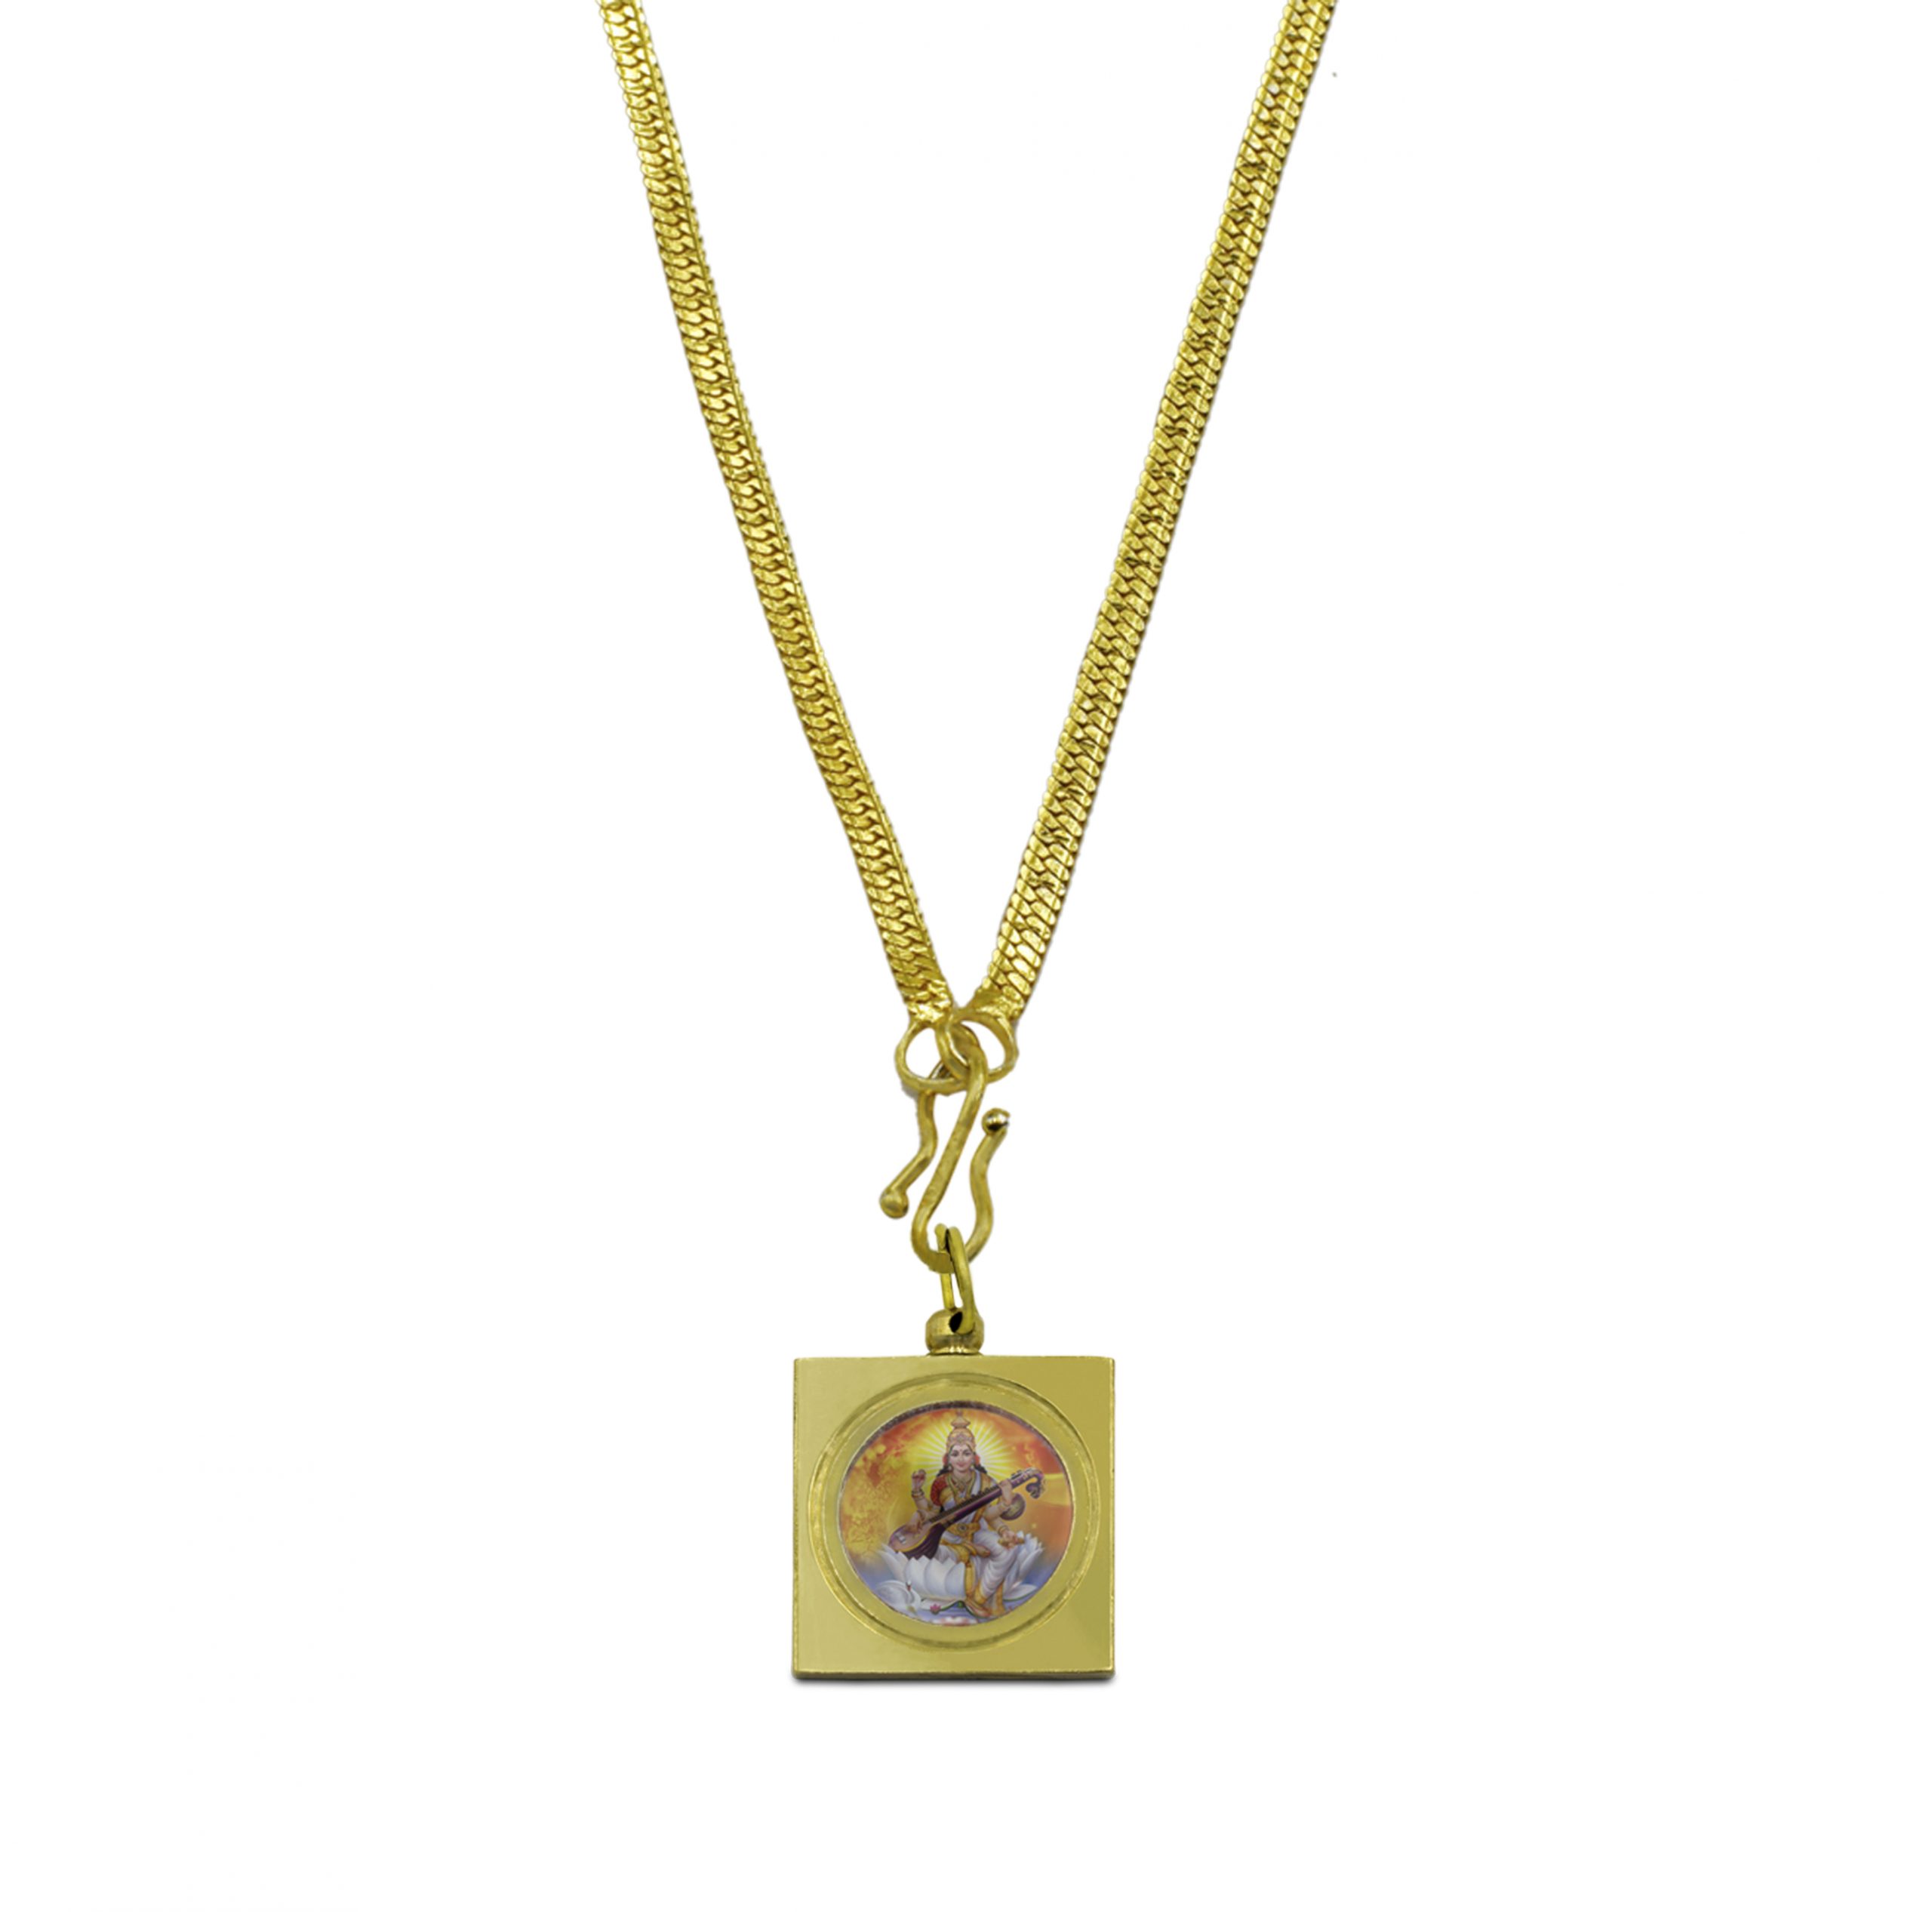 Painted image of Maa Saraswati in a hanging square shape locket with gold chain to seek blessings from the goddess of knowledge